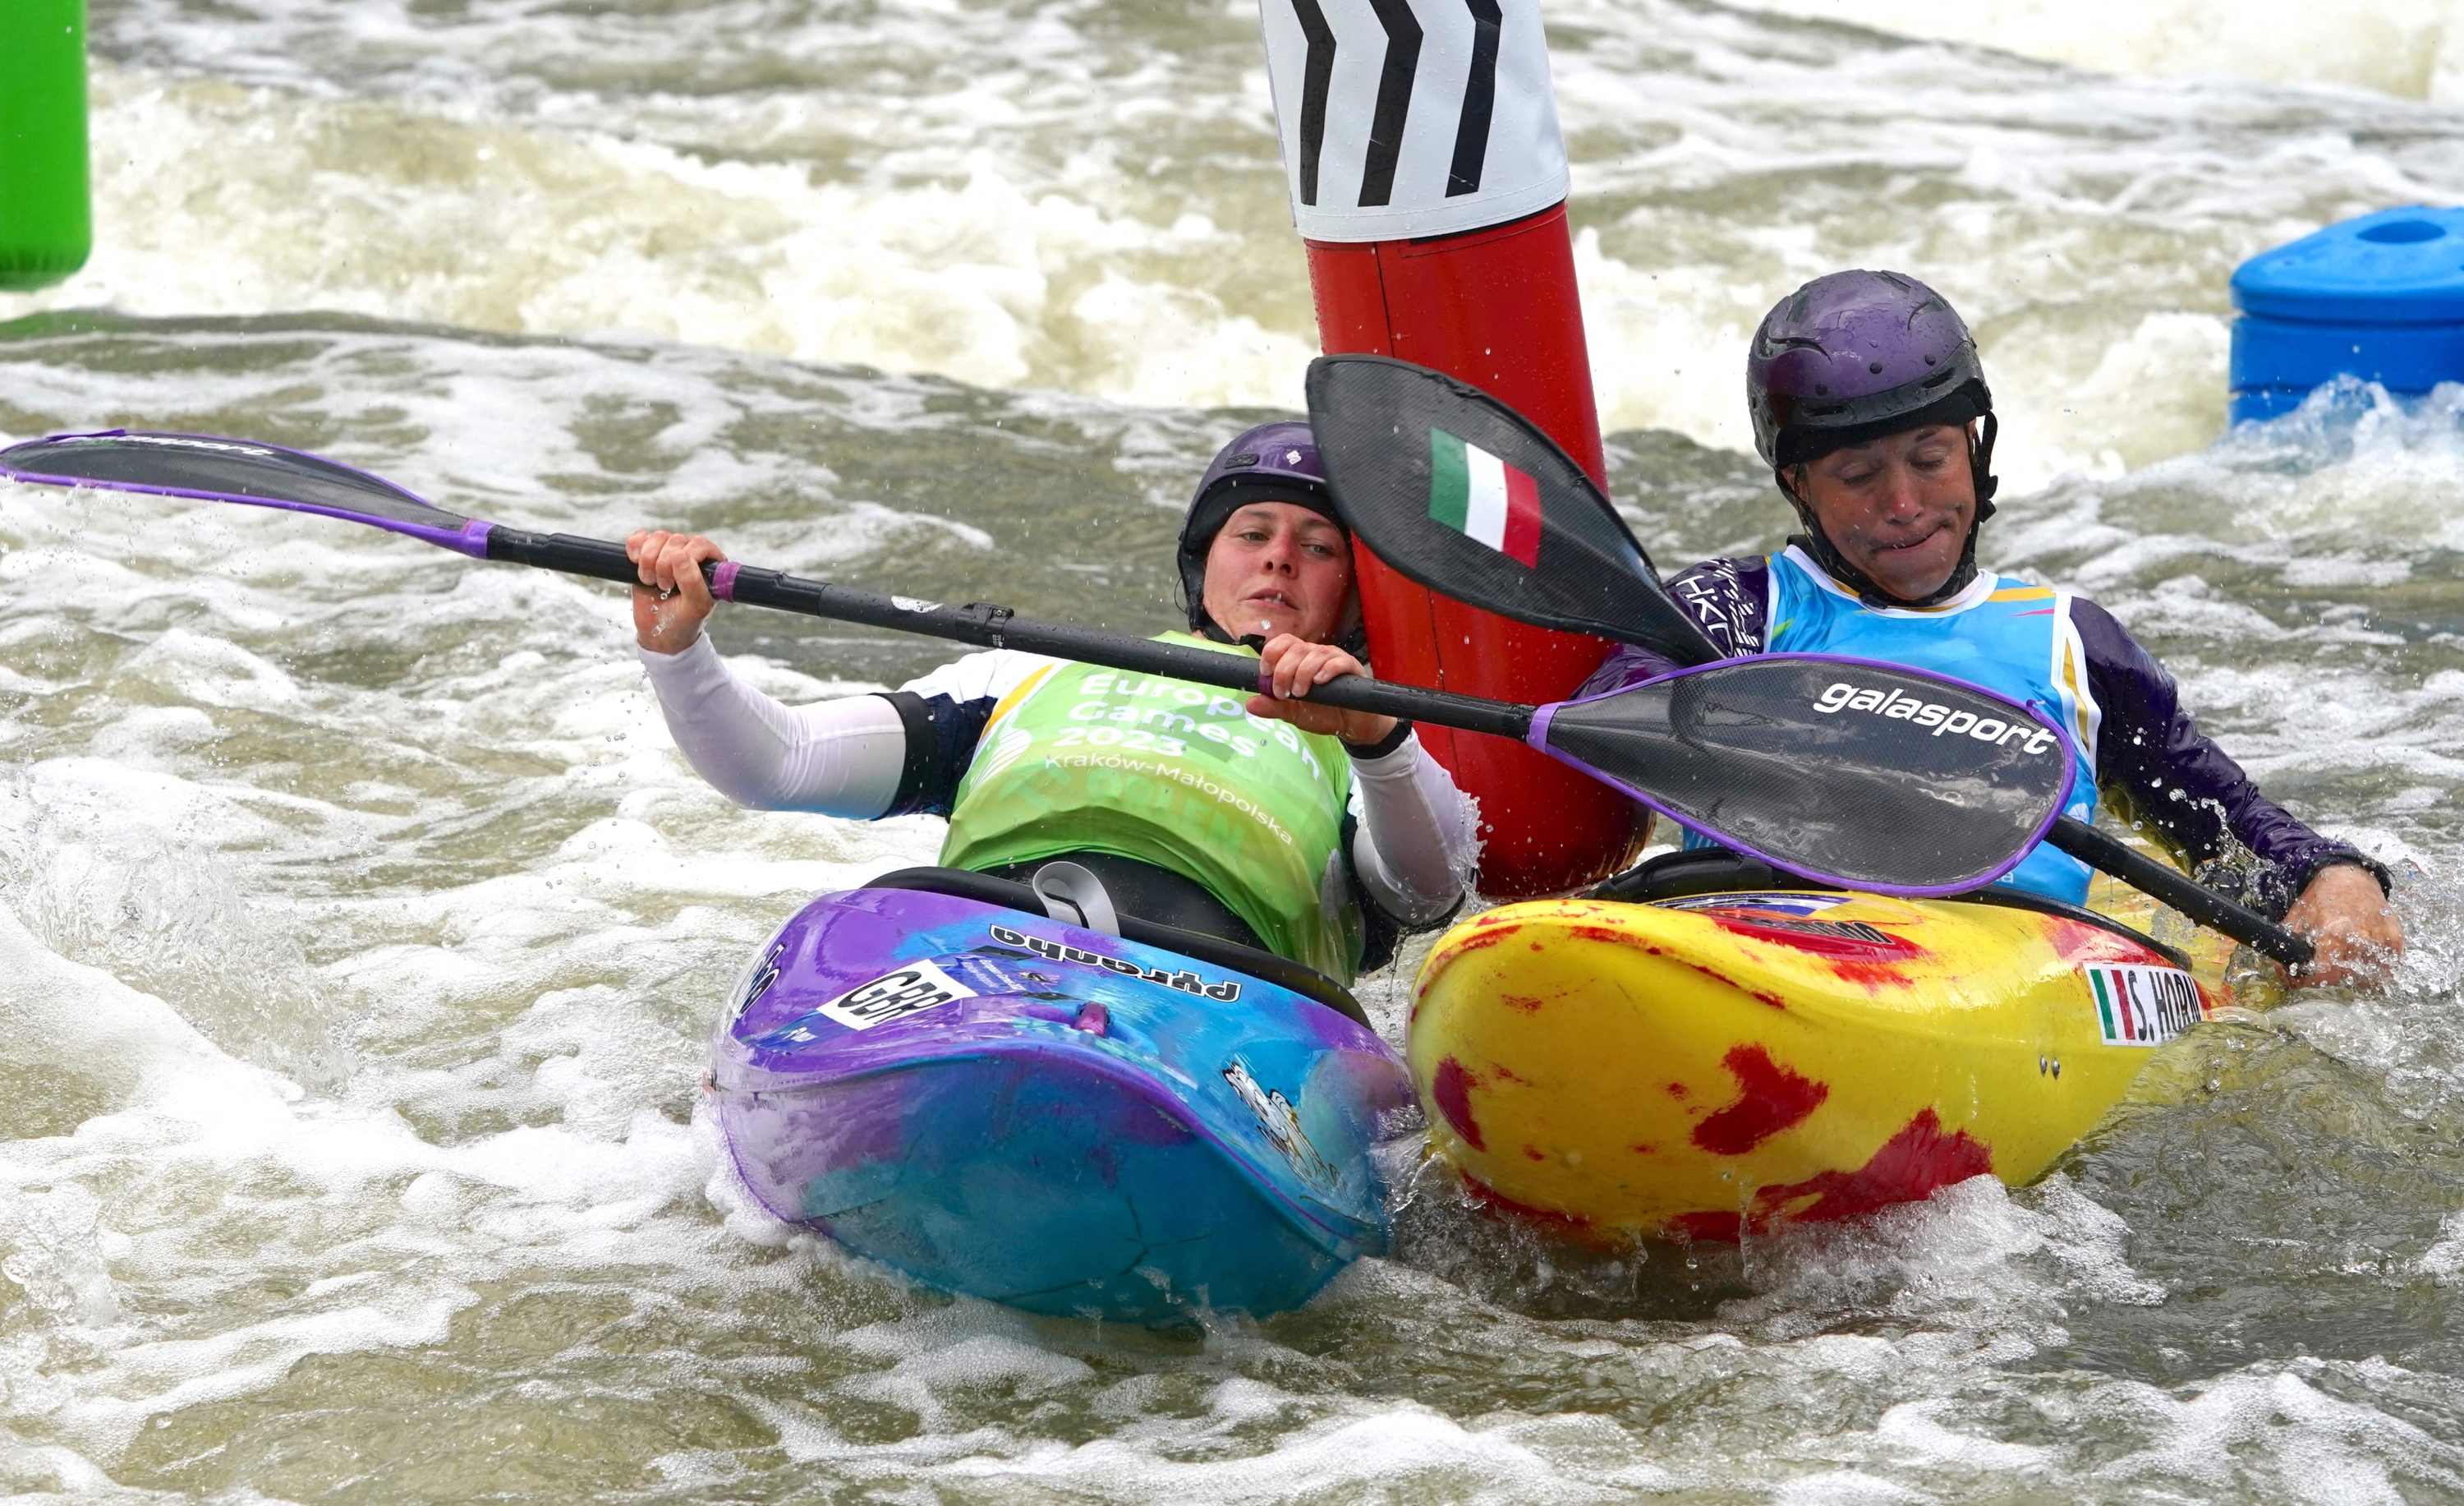 Bronze medalist Italy's Stefanie Horn (R) and Britain's Kimberley Woods compete during the Women's Kayak Cross event during the European Games 2023 in Krakow, Poland, on July 02, 2023. (Photo by JANEK SKARZYNSKI / AFP)